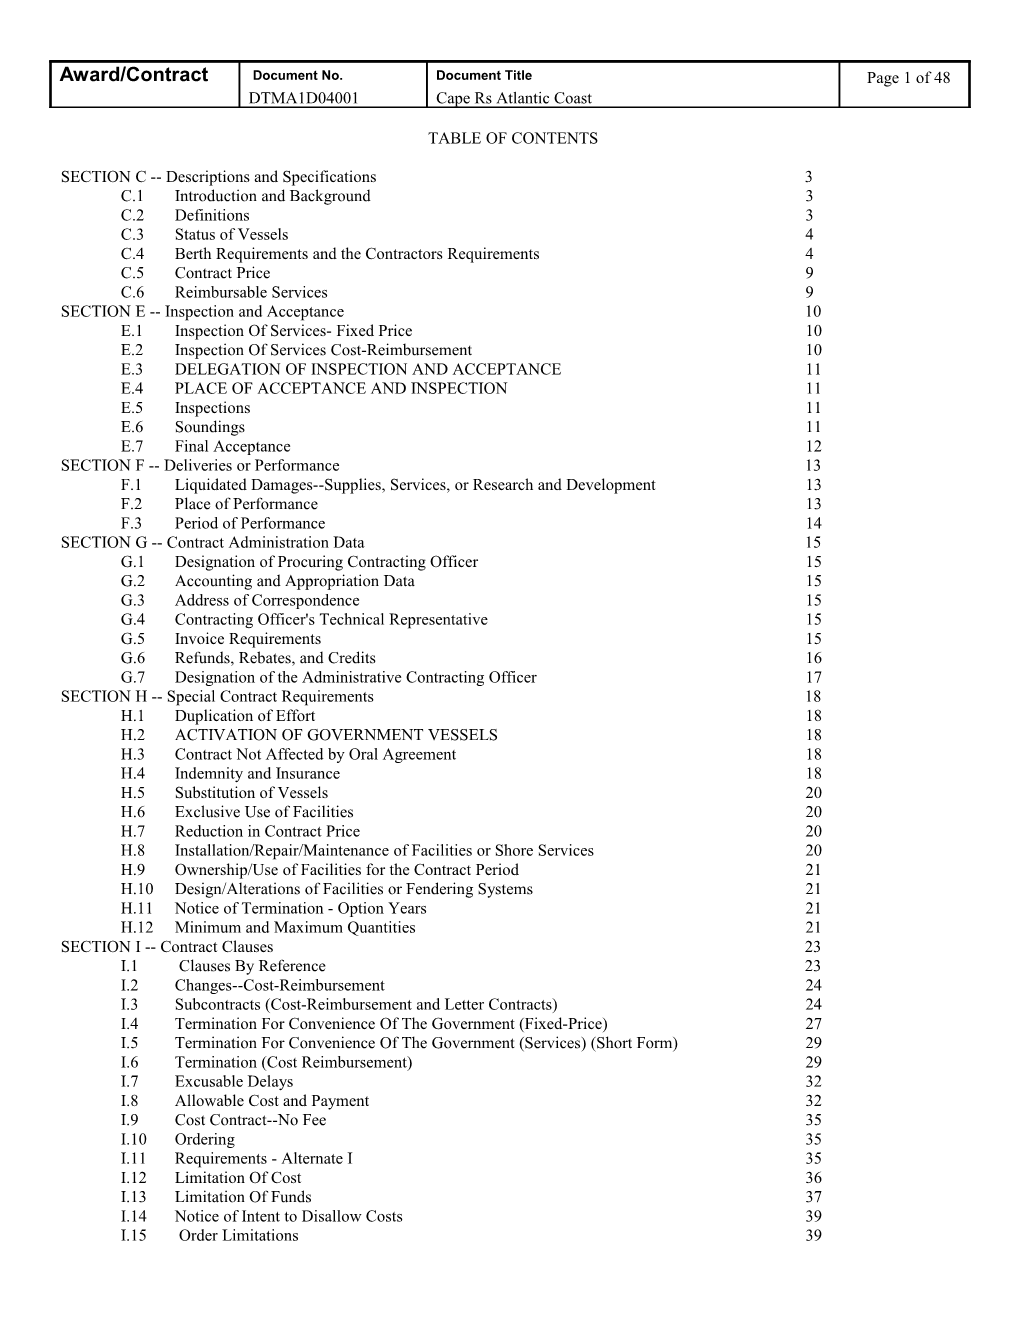 Table of Contents s246